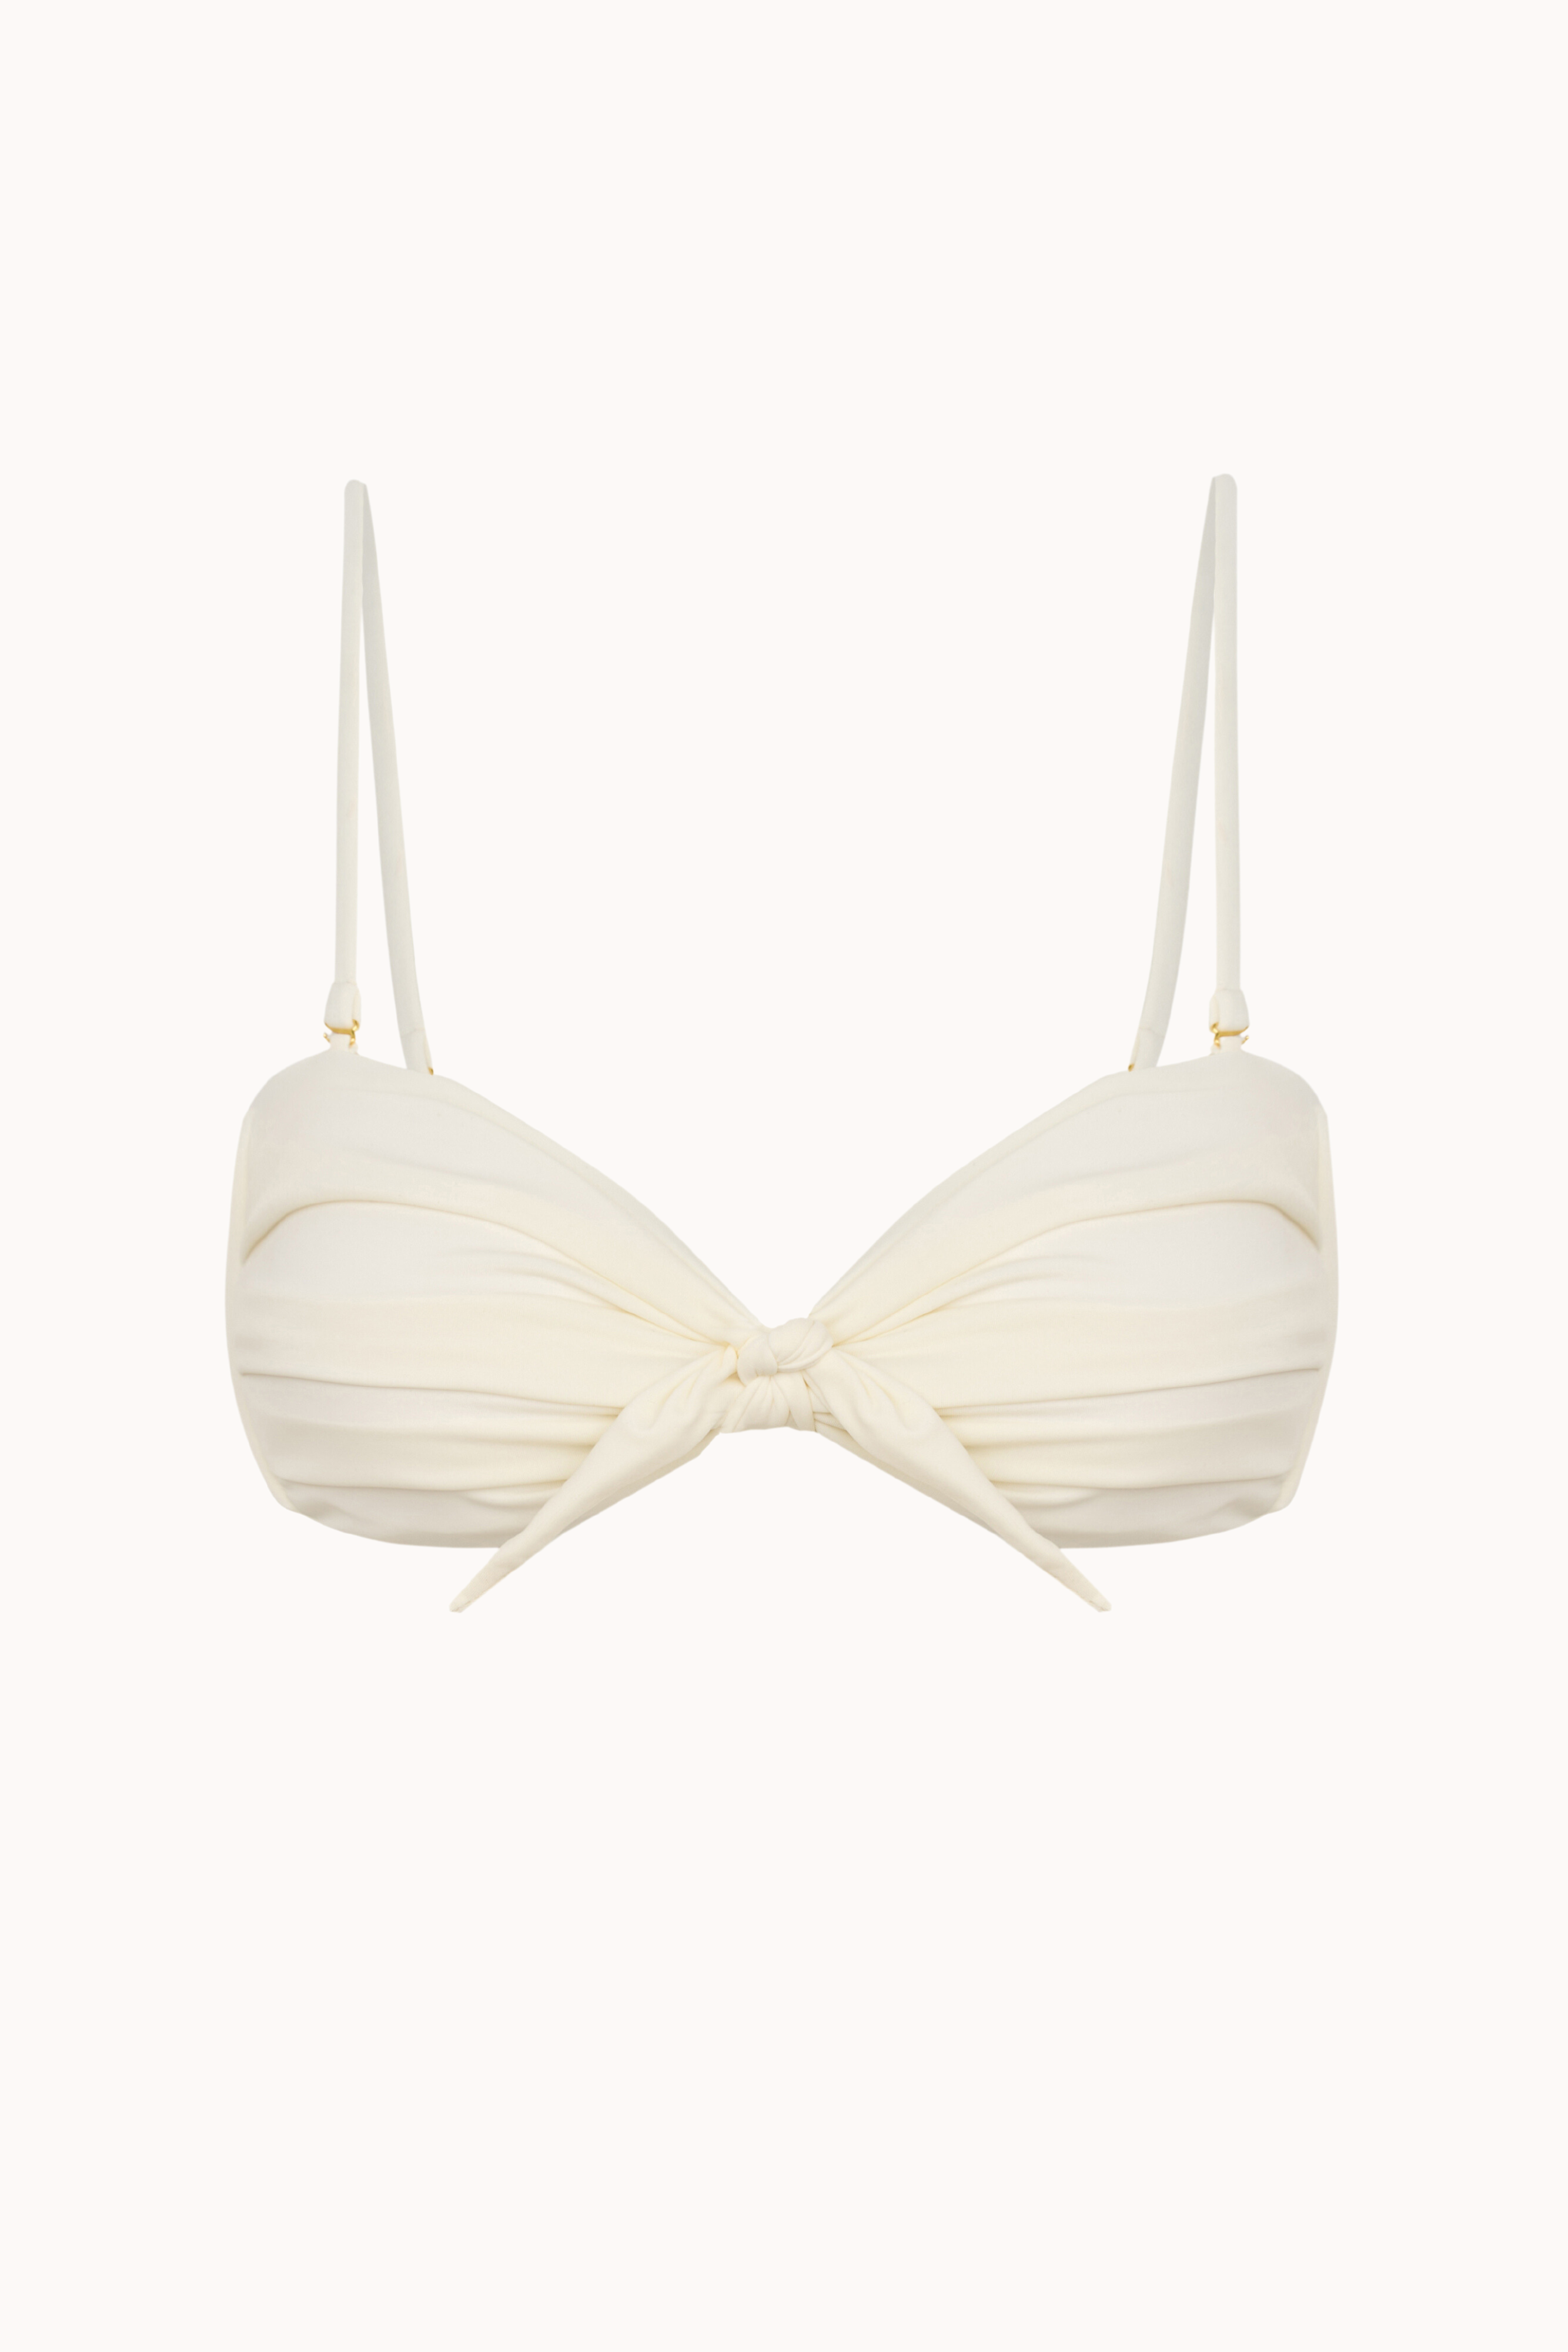 The Bandeau Top in ivory